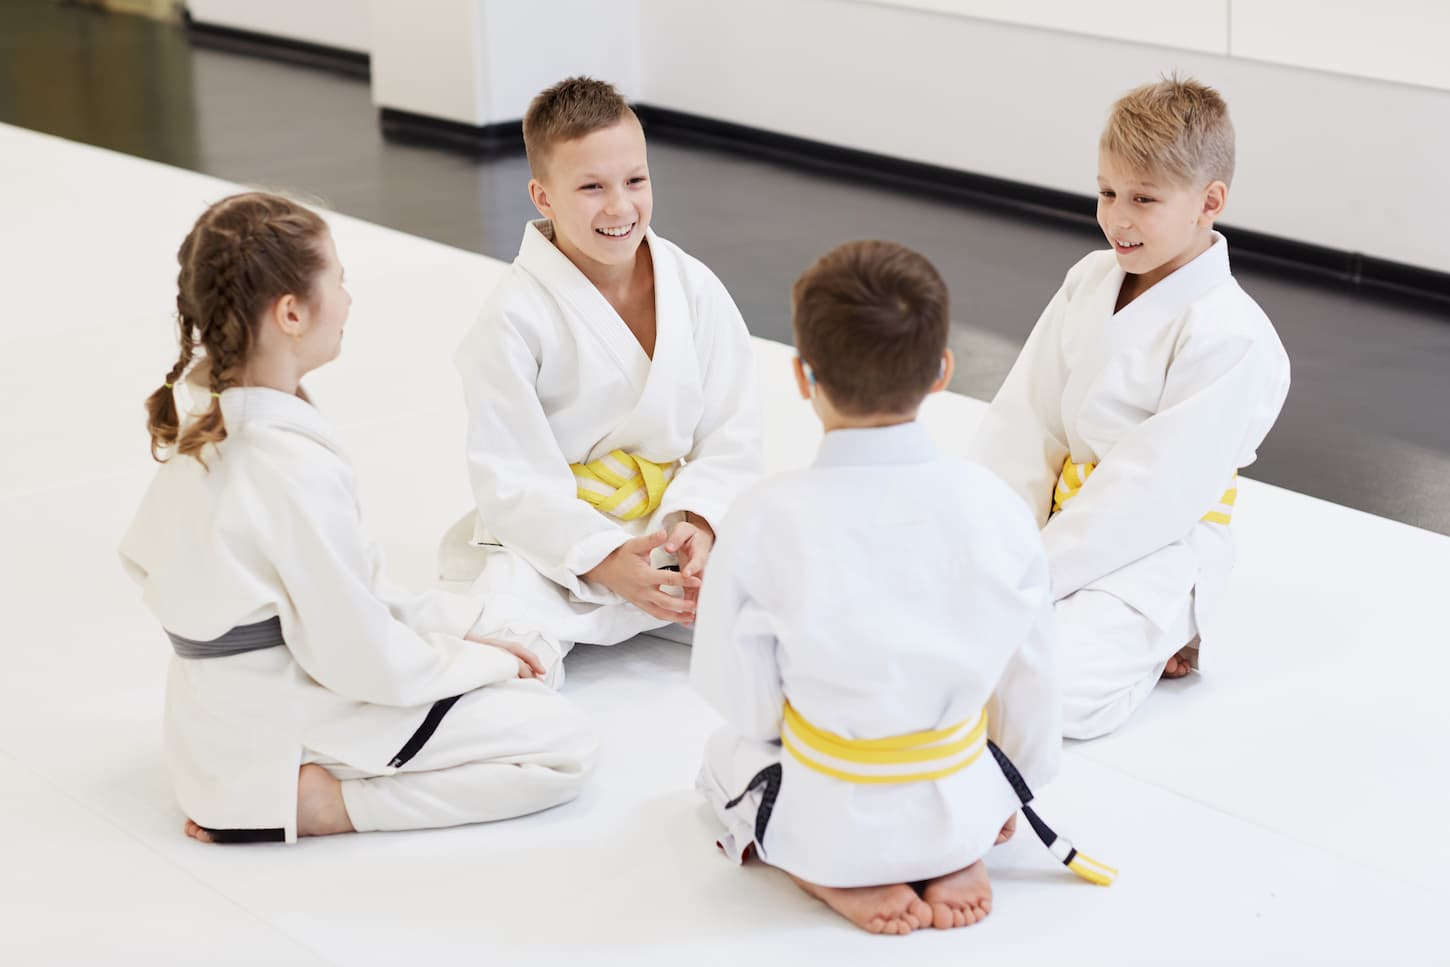 An image of a Group of children sitting on the floor together and talking to each other before sports training in karate in the gym.